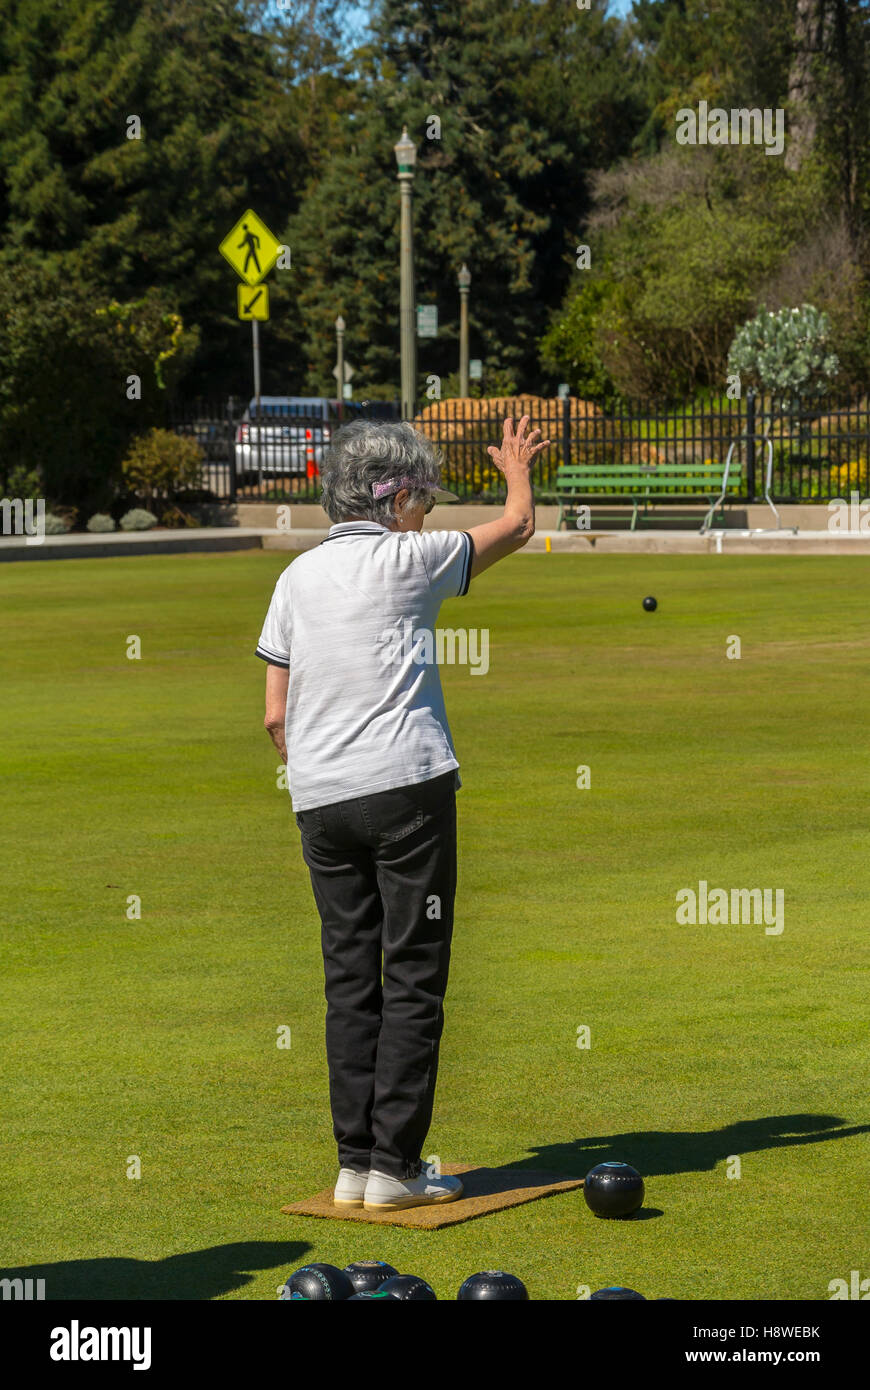 San Francisco, CA, USA, Senior Woman from behind, standing, Playing Lawn Bowling, Bocce Ball Game, Golden Gate Park, Grassy Field, 65-80 years sport Stock Photo